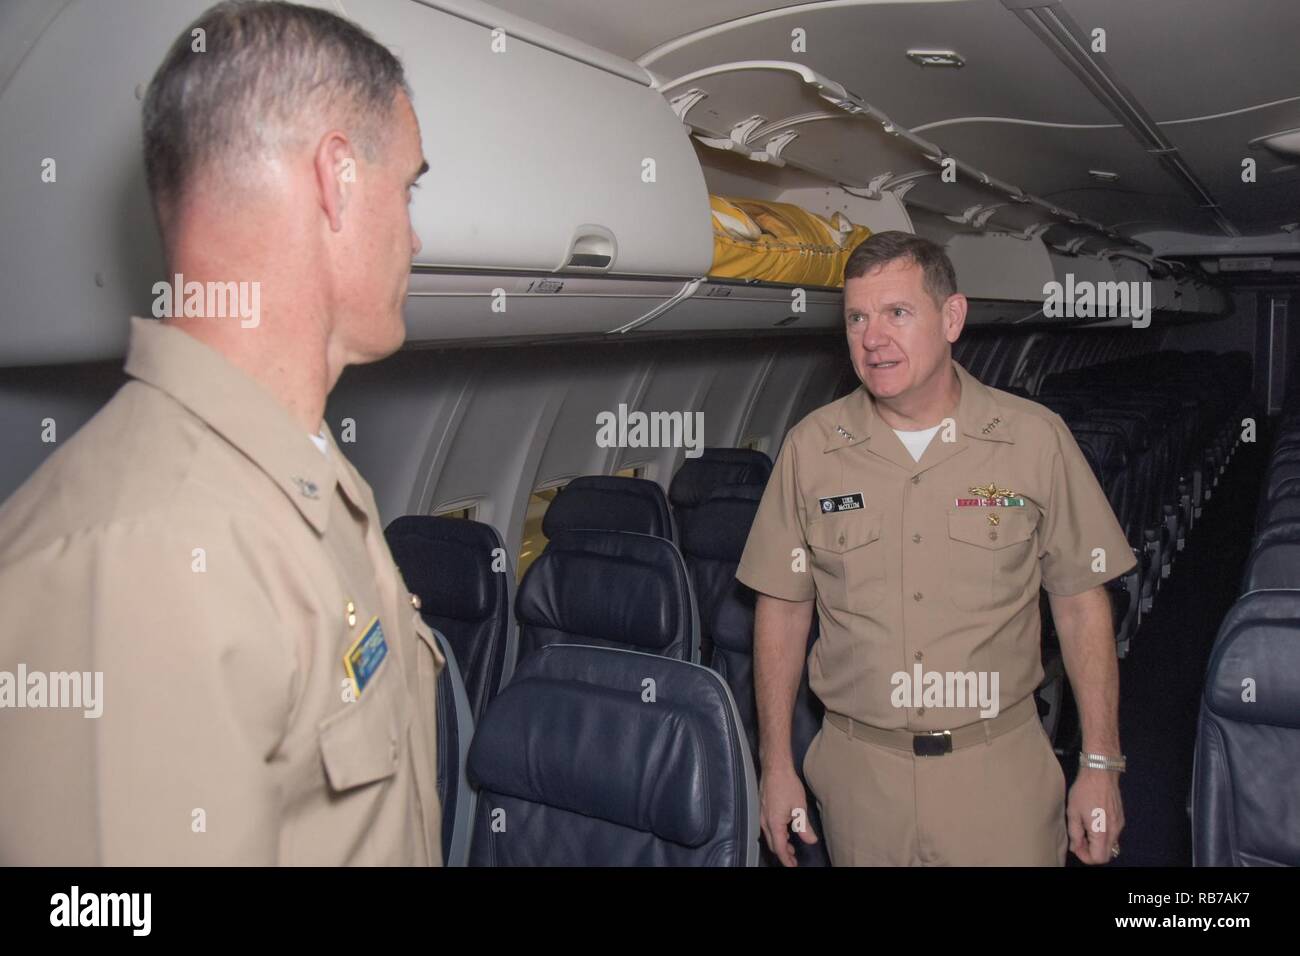 FORT WORTH, Texas (Dec. 1, 2016) Vice Adm. Luke McCollum, chief of Navy Reserve/commander, Navy Reserve Force, tours of a C-40A 'Clipper' with Capt. Scott Eargle, commodore, Fleet Logistics Support Wing, and talks about various operations conducted by Fleet Logistics Support Squadron (VR) 59 at Naval Air Station Fort Worth Joint Reserve Base.  McCollum, formerly deputy commander of the Navy Expeditionary Combat Command, became the 14th chief of Navy Reserve/commander, Navy Reserve Force Sept. 2016. Stock Photo